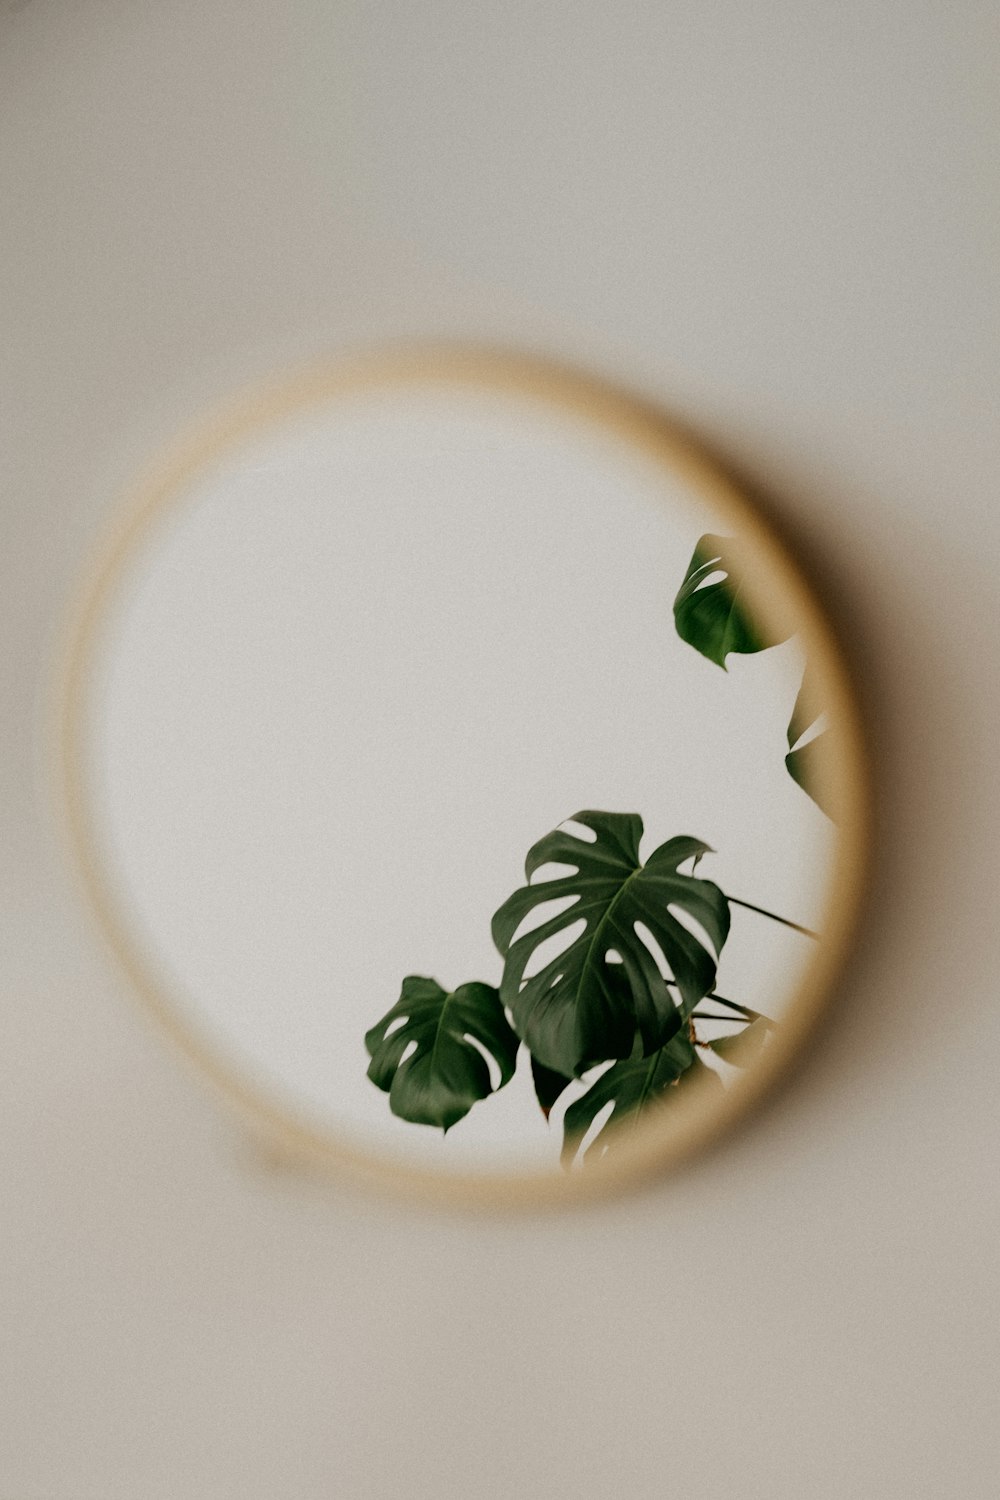 green leaves on white and brown ceramic plate